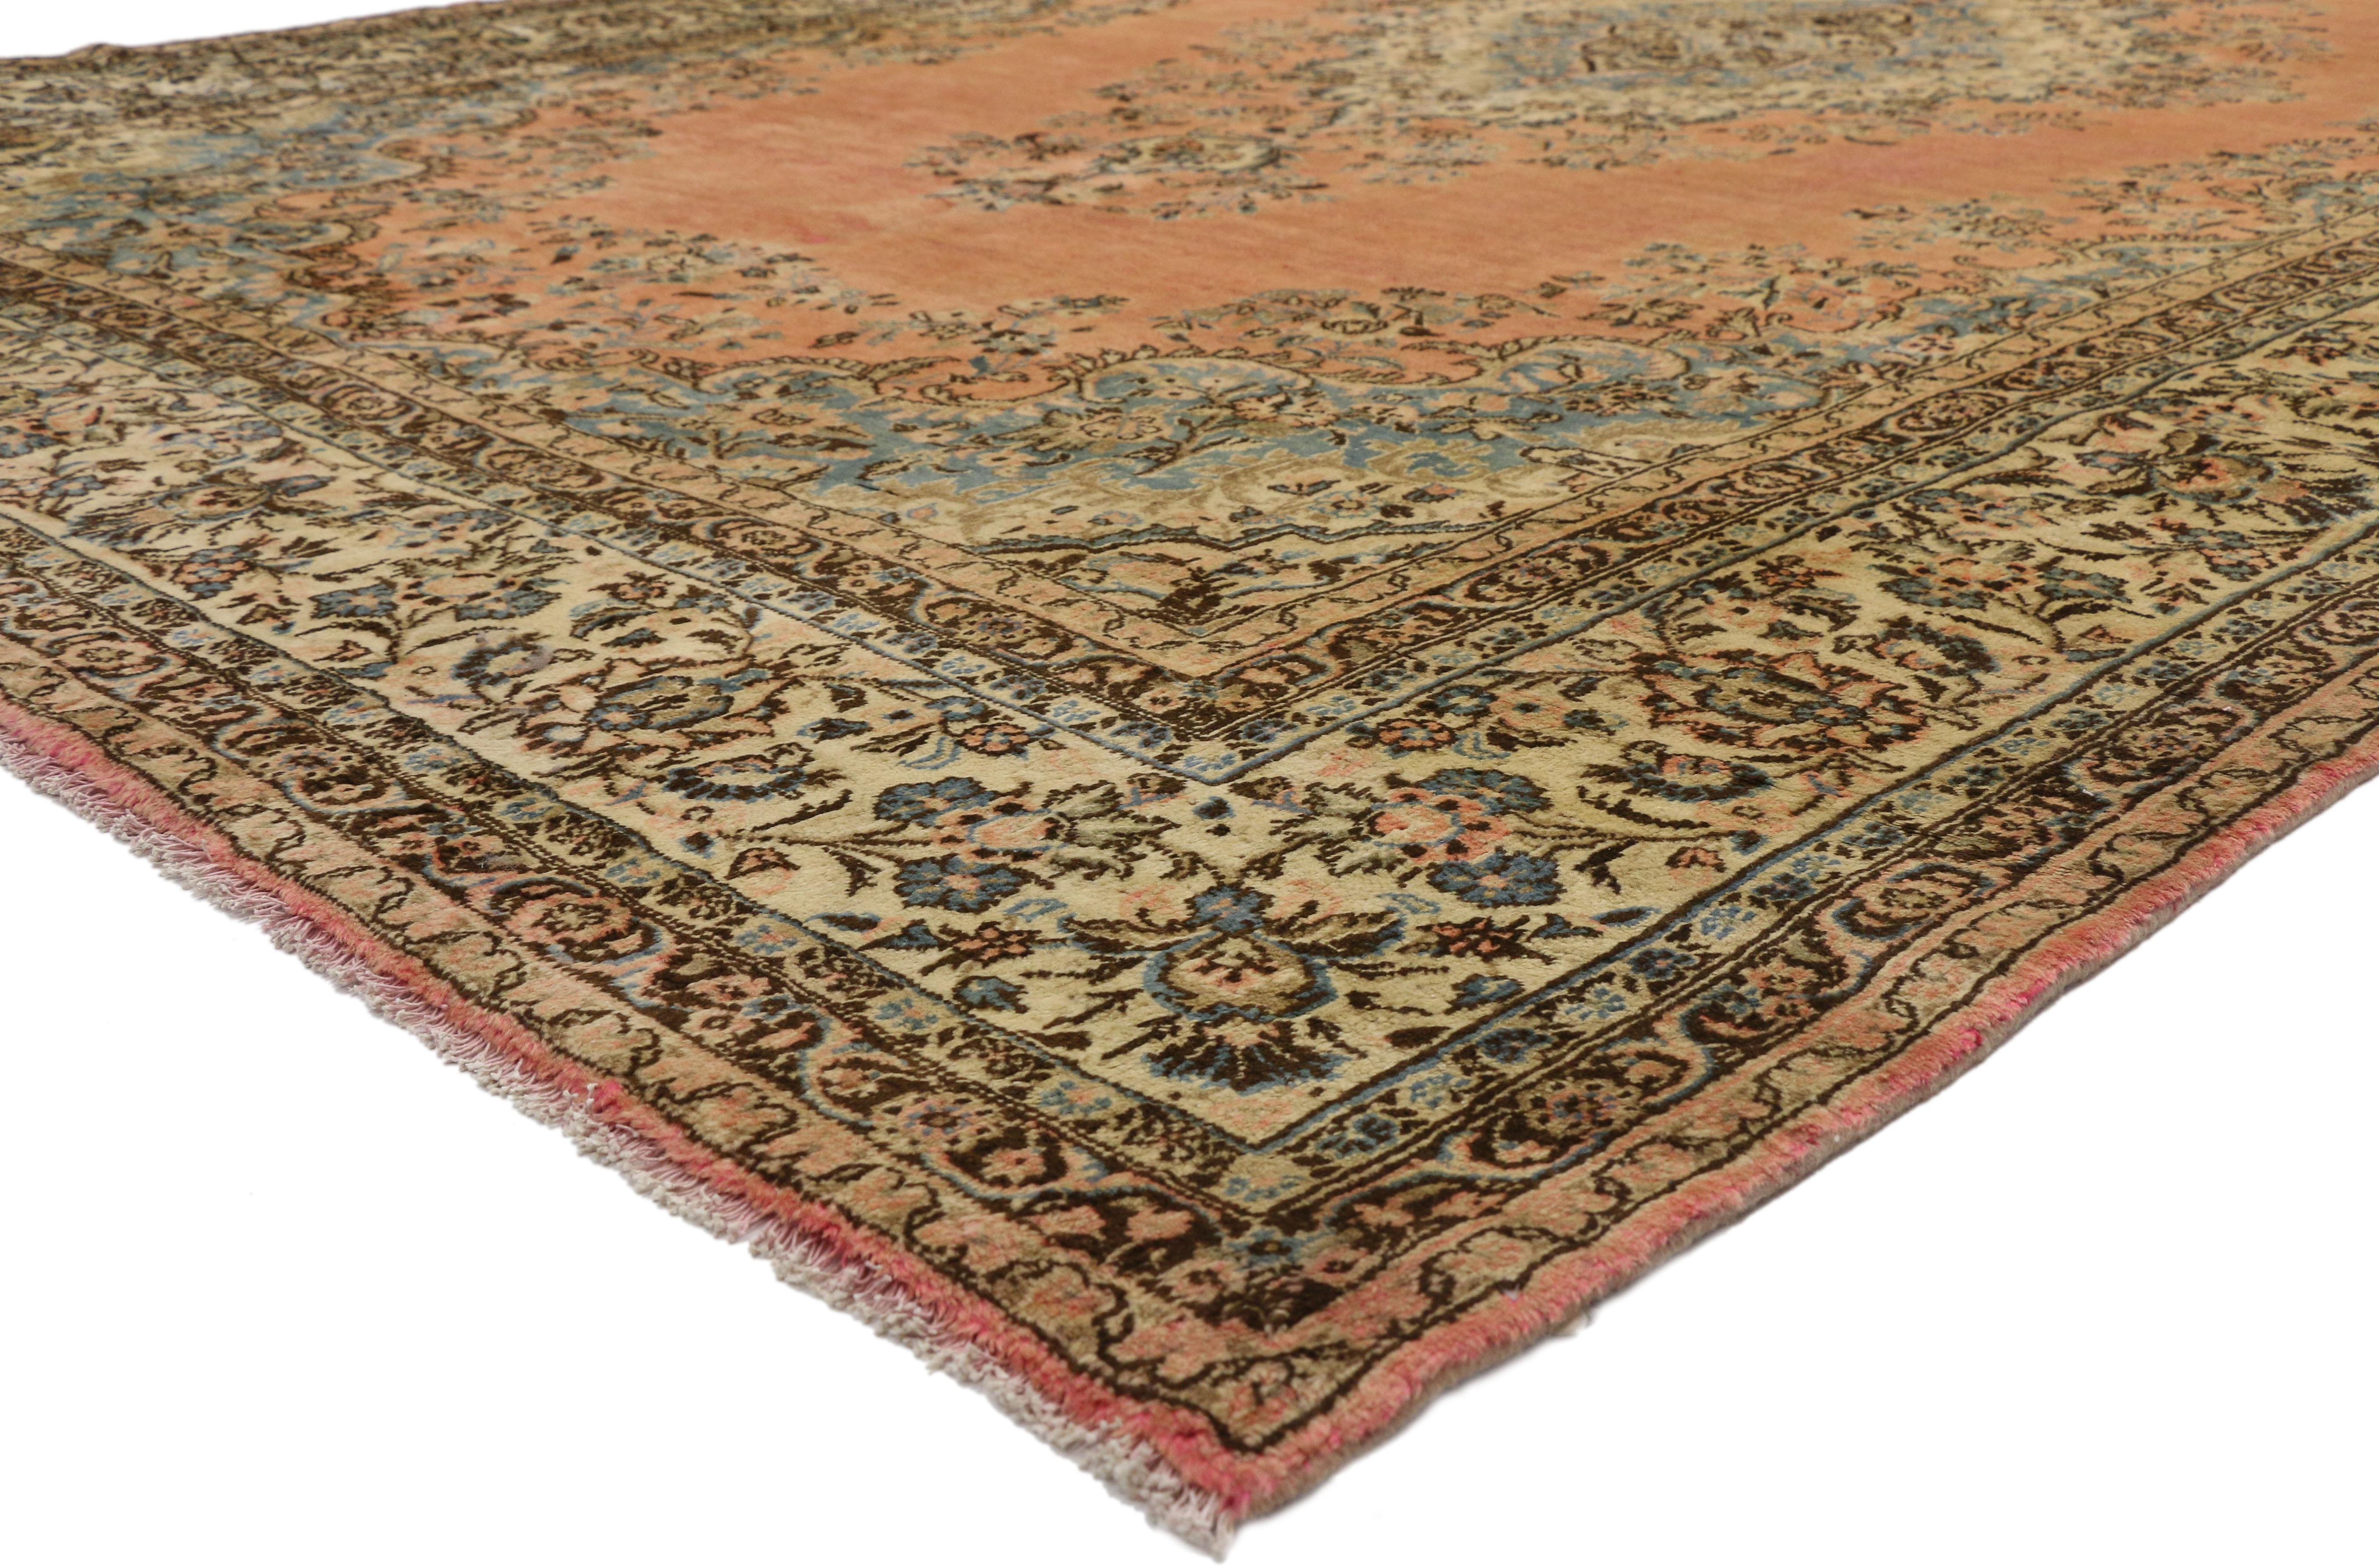 76540, vintage Persian Kasvin Hamadan rug with Kerman Design and French Provincial style. This hand-knotted wool vintage Persian Kasvin Hamadan rug with Kerman style features dainty floral sprays around a lobed medallion on an abrashed field. A